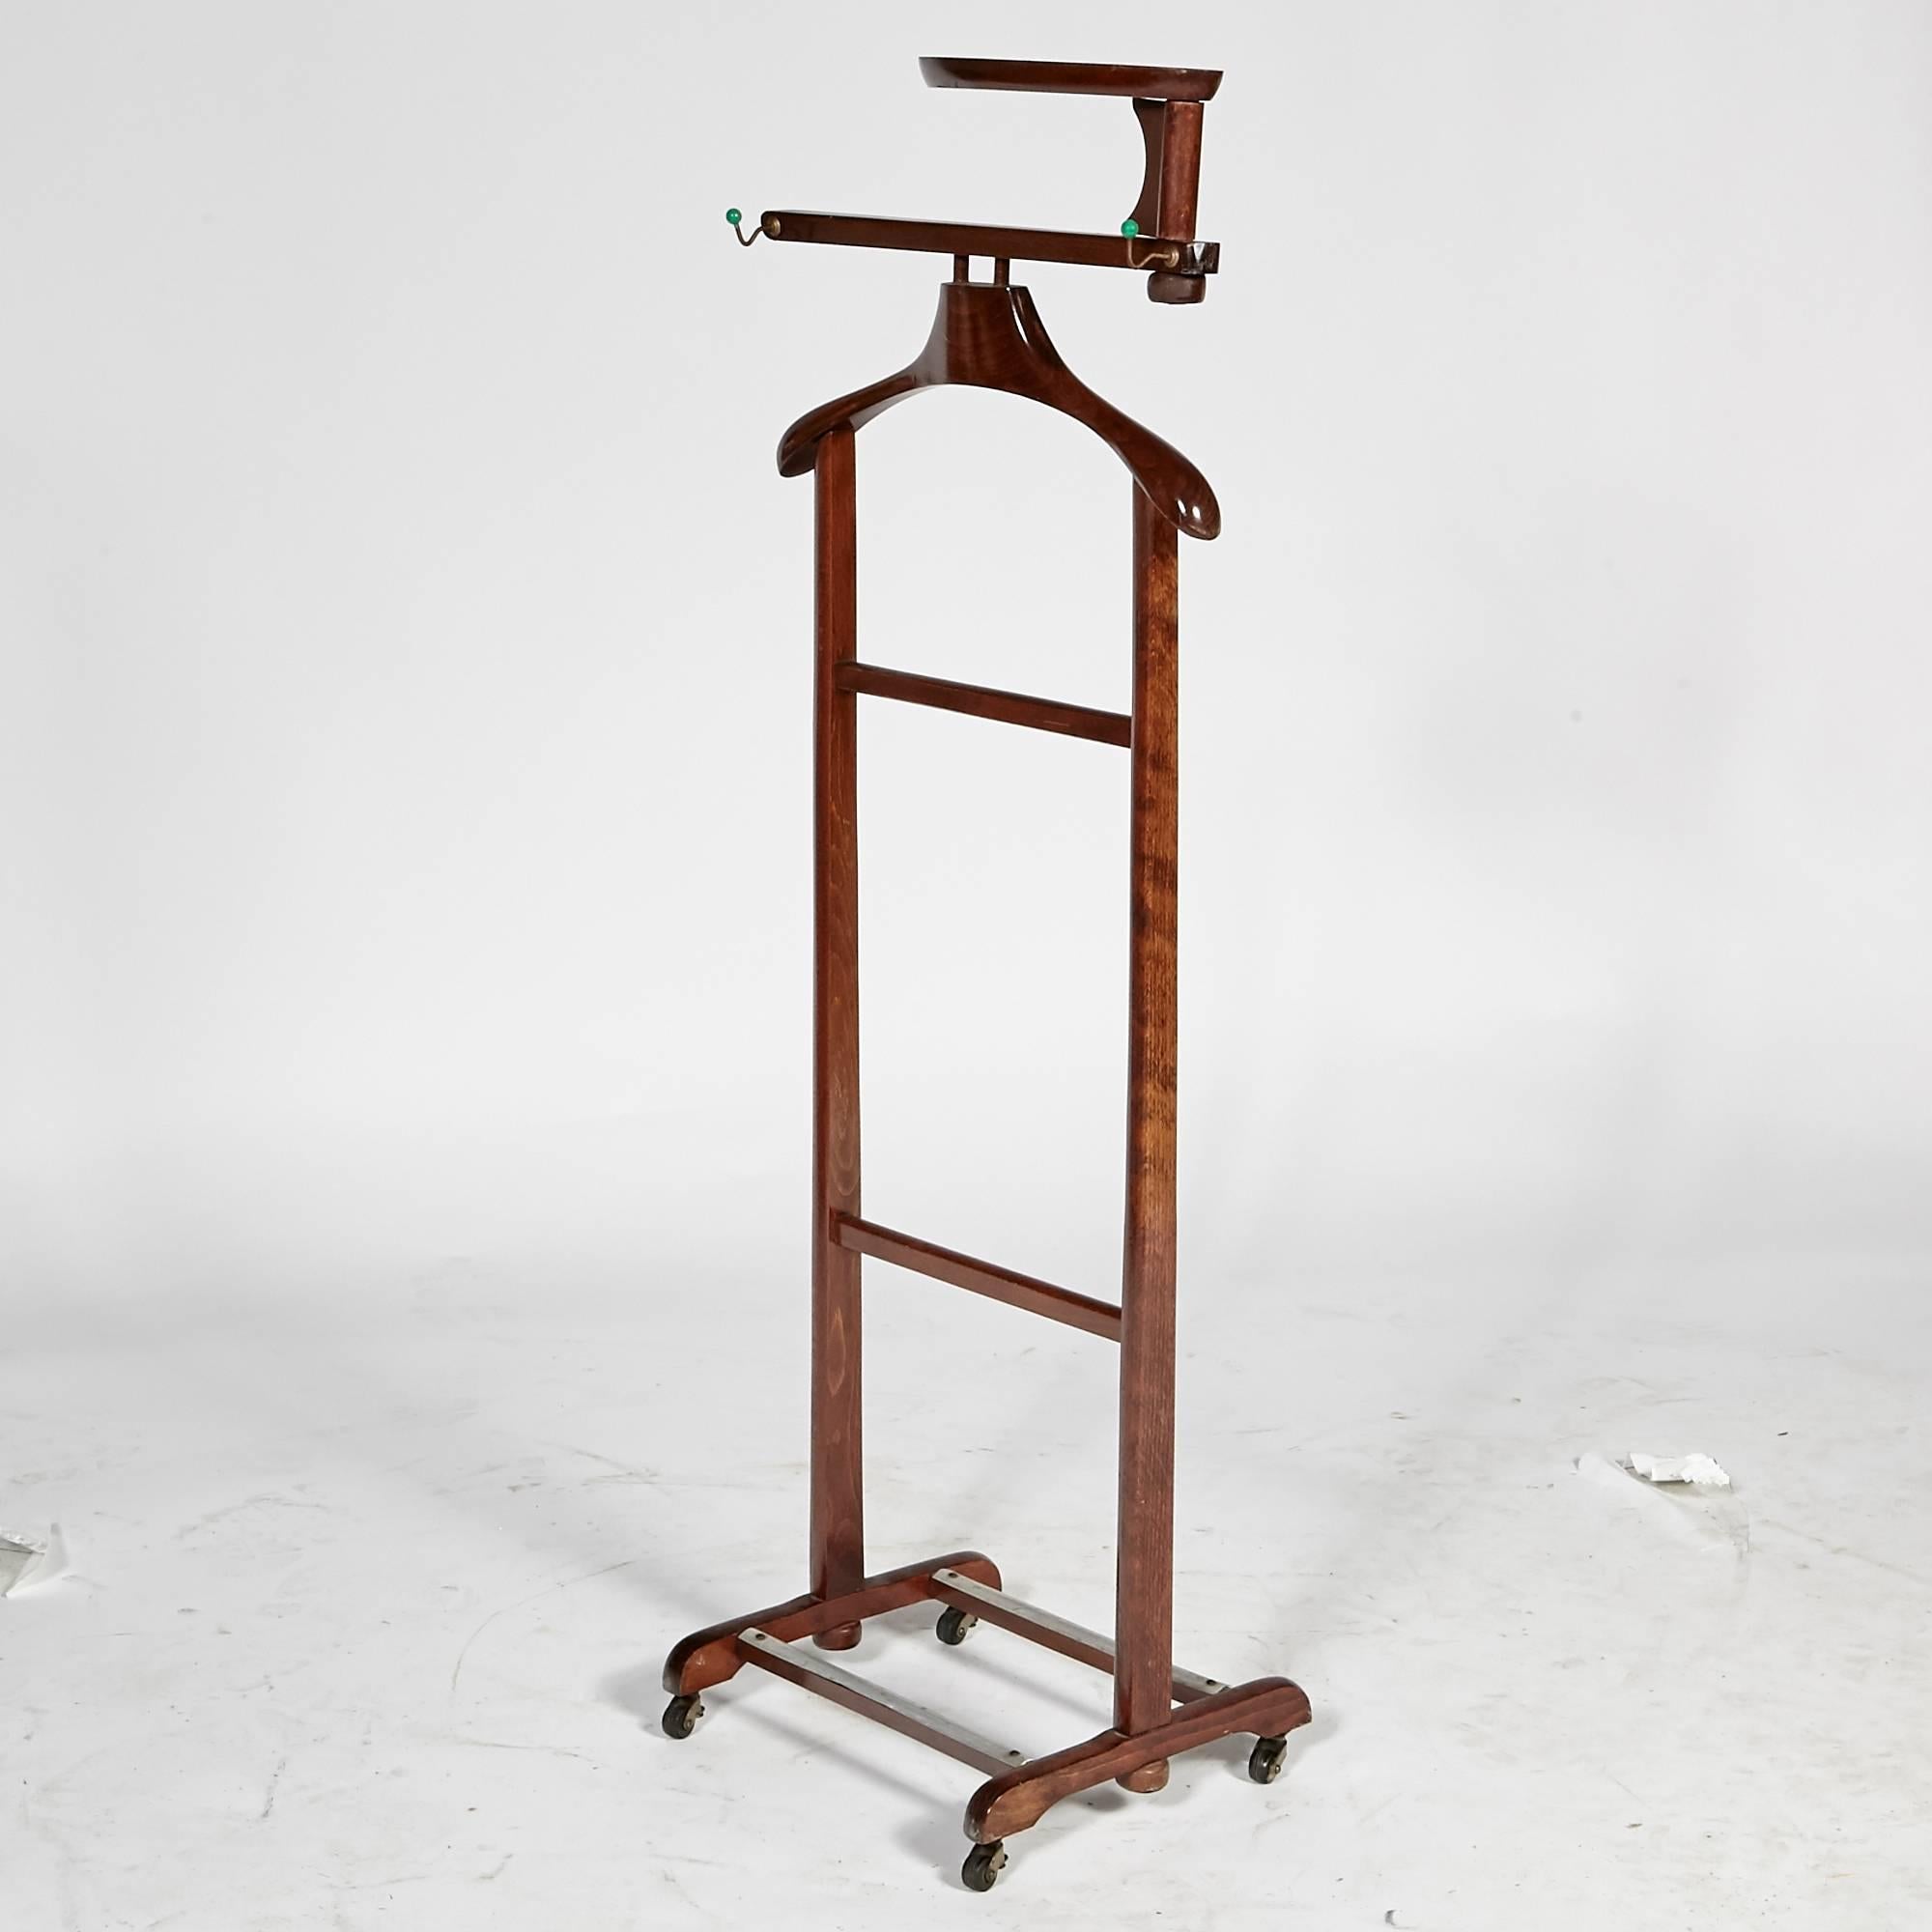 Vintage 1960s mahogany wood men's bedroom valet stand with metal hooks. The top tray swivels out. No maker's mark.